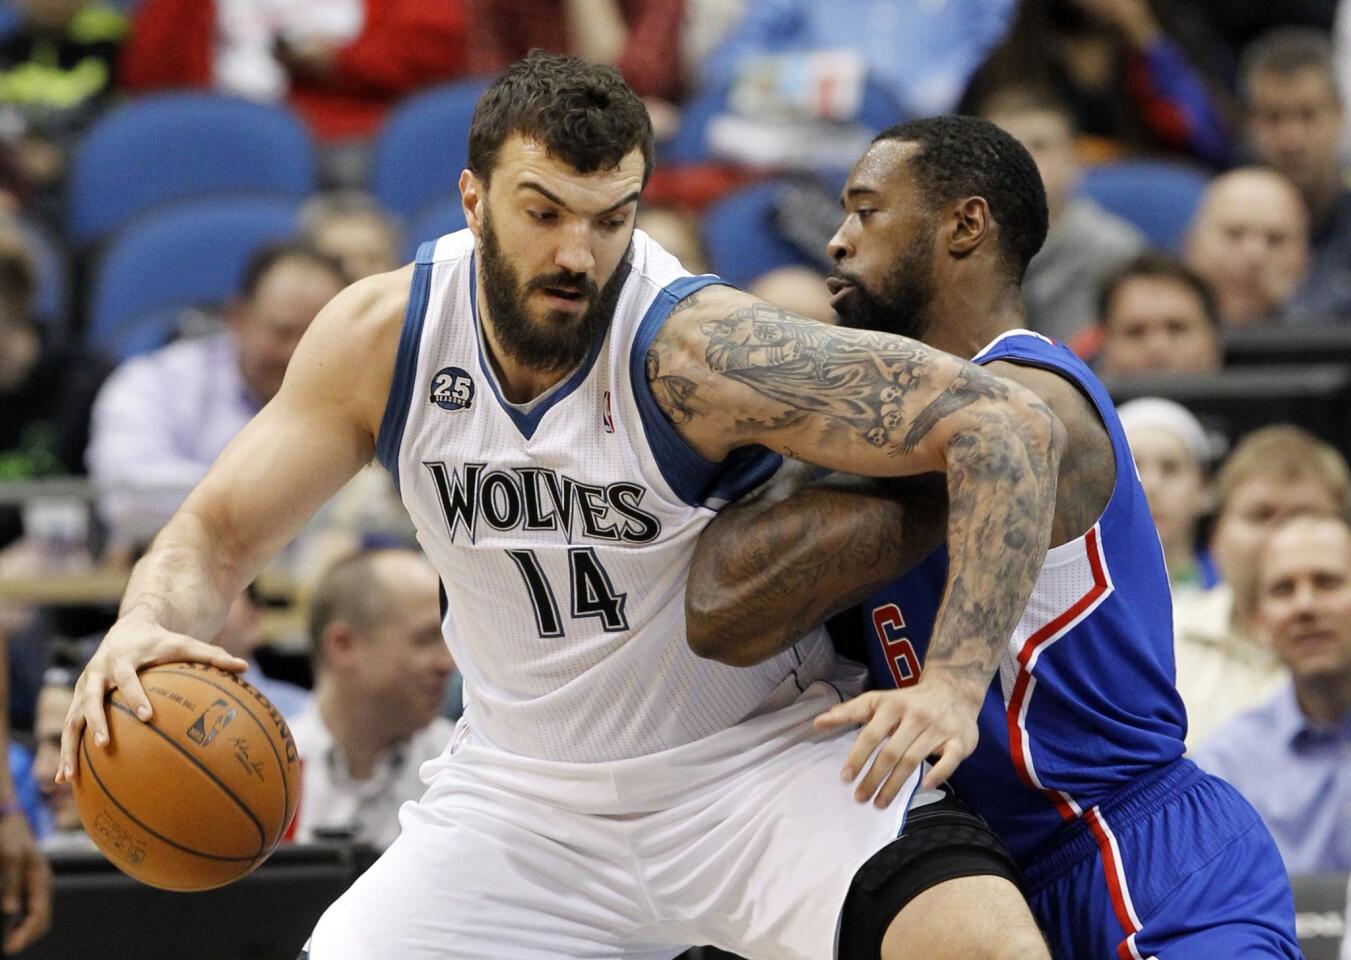 Minnesota Timberwolves center Nikola Pekovic, left, is guarded by Clippers center DeAndre Jordan during the Clippers' 114-104 road win Monday.